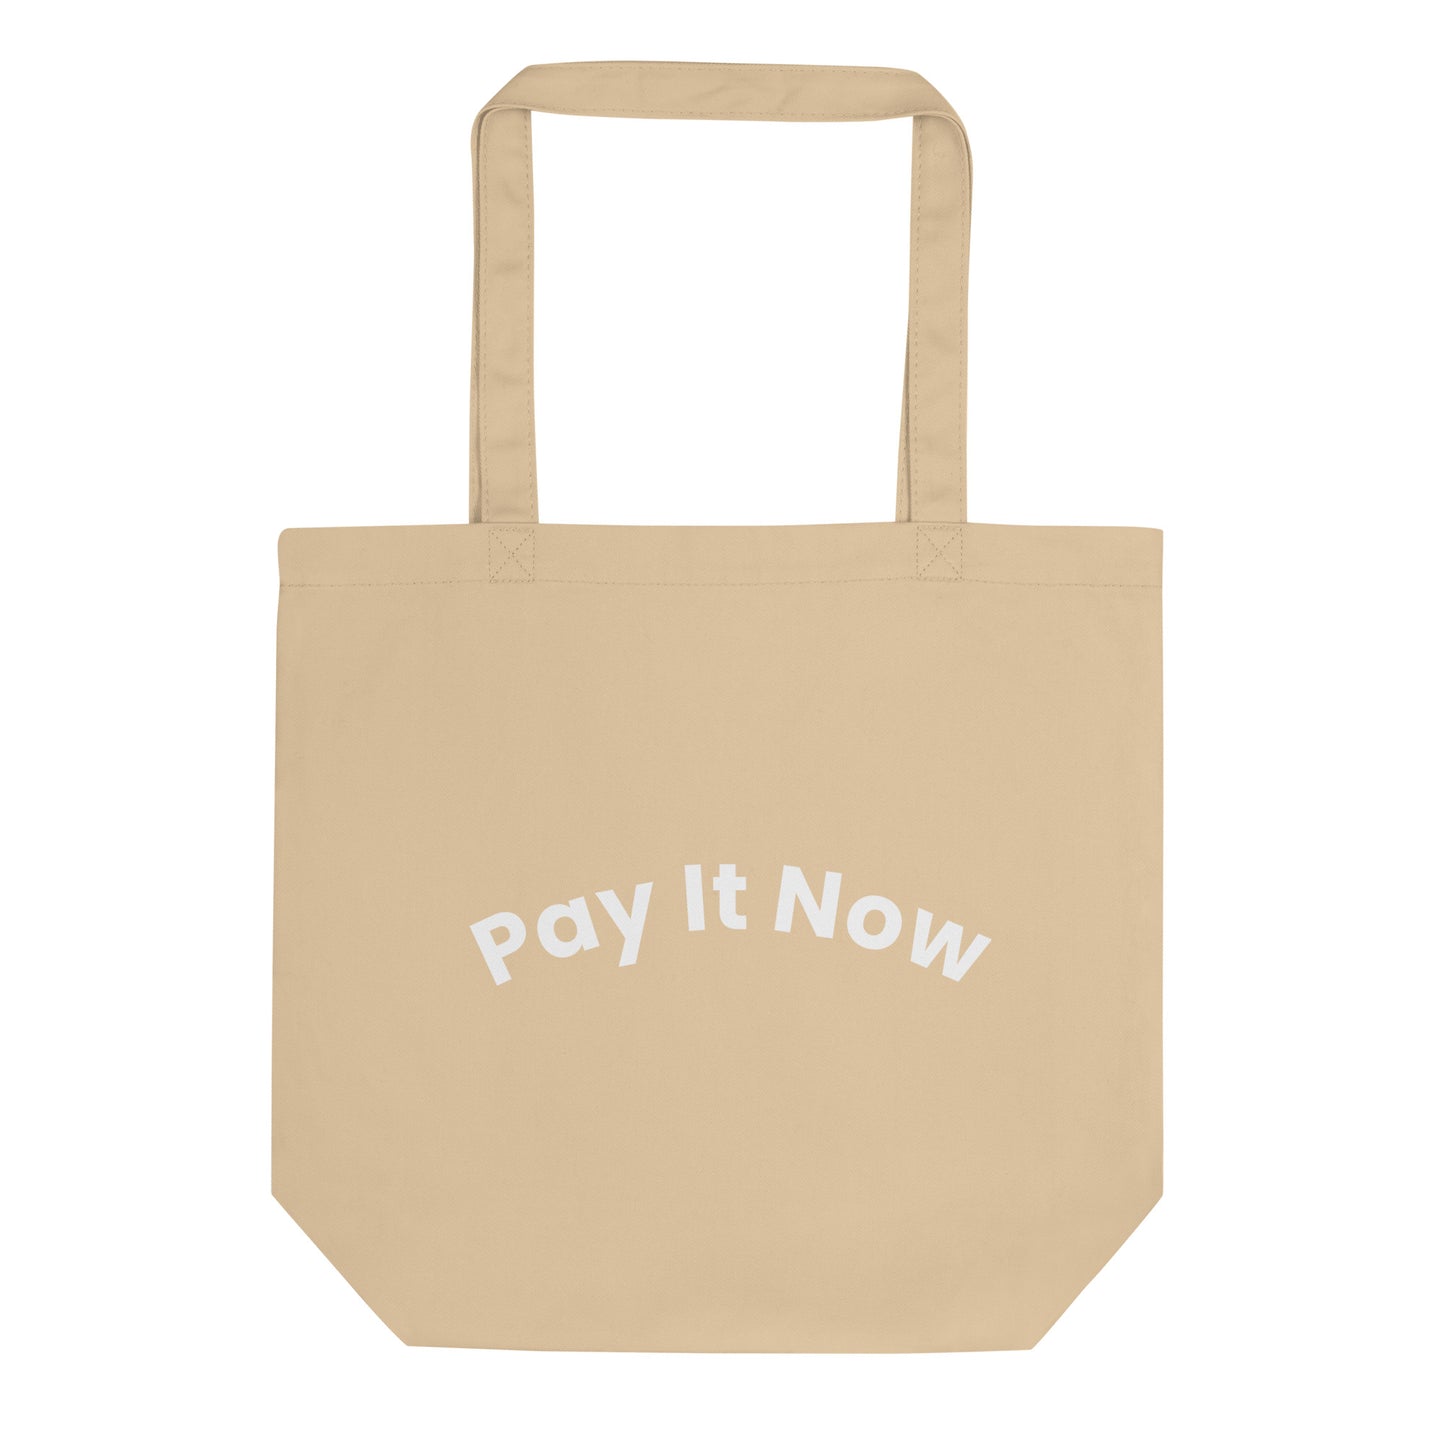 Pay It Now tote bag